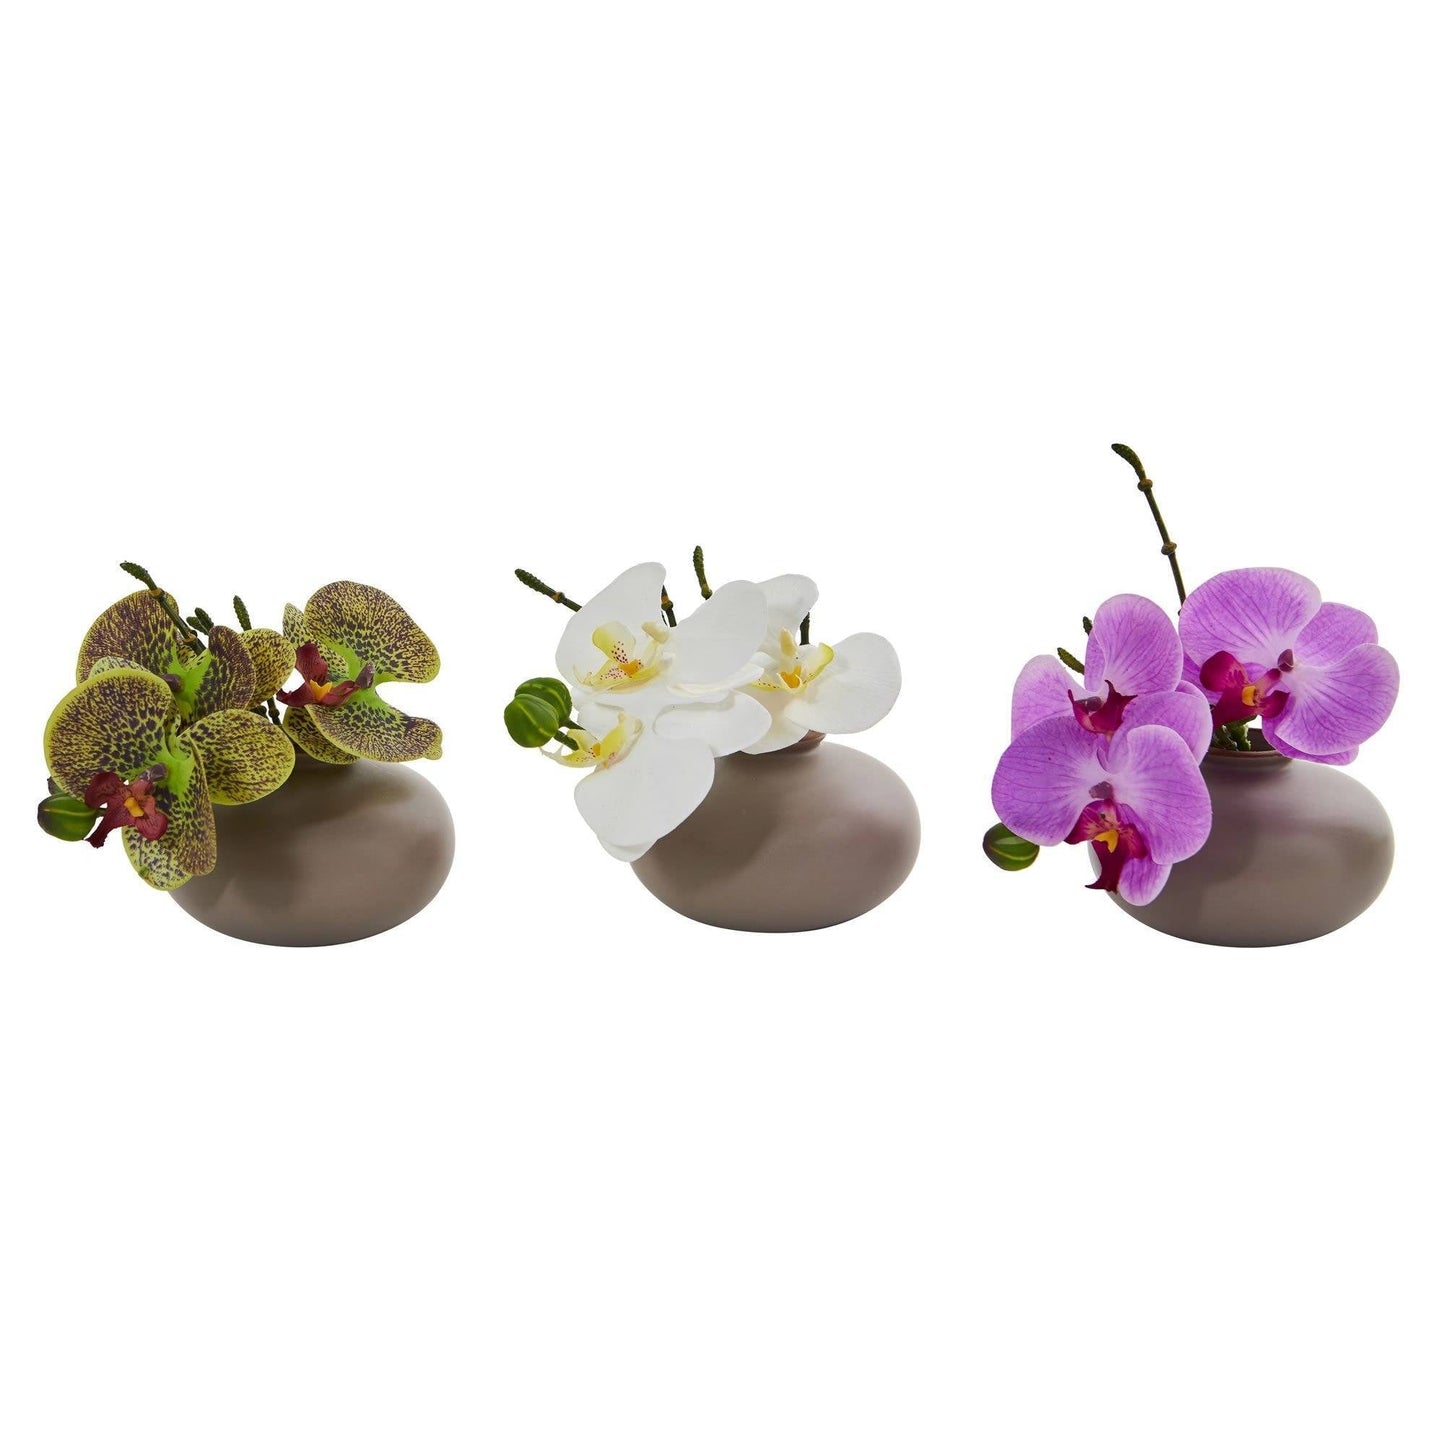 7” Phalaenopsis Orchid Artificial Arrangement (Set of 3) by Nearly Natural